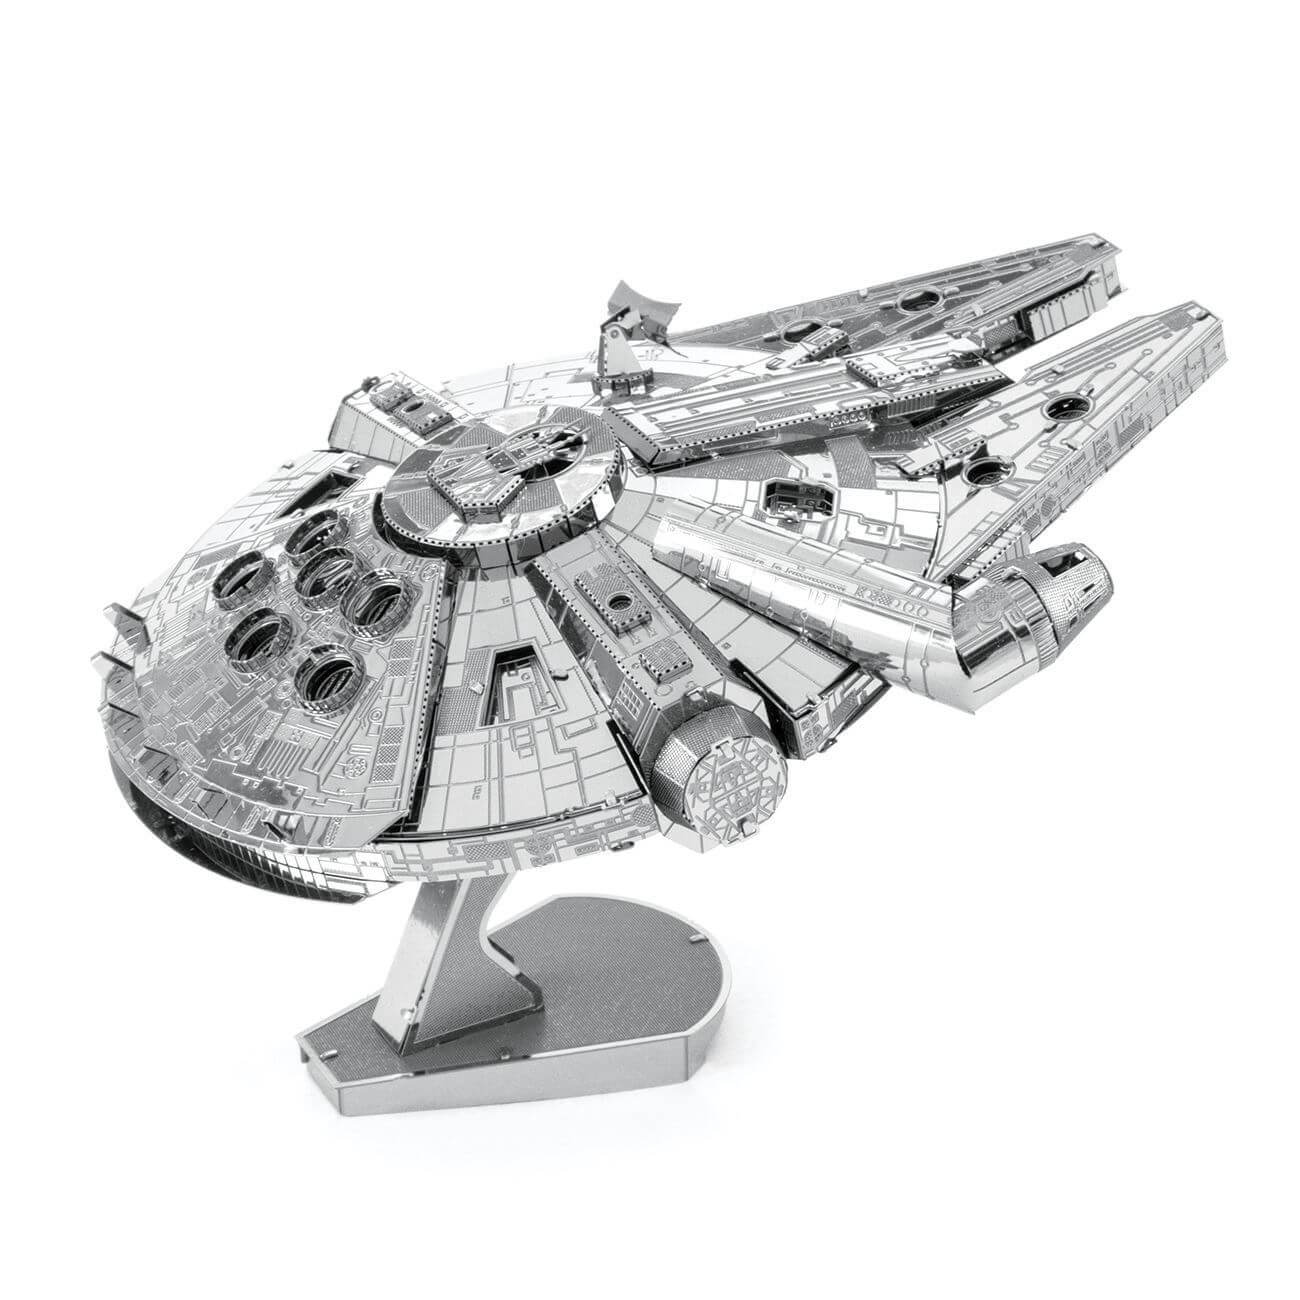 Side view of the star wars ship.